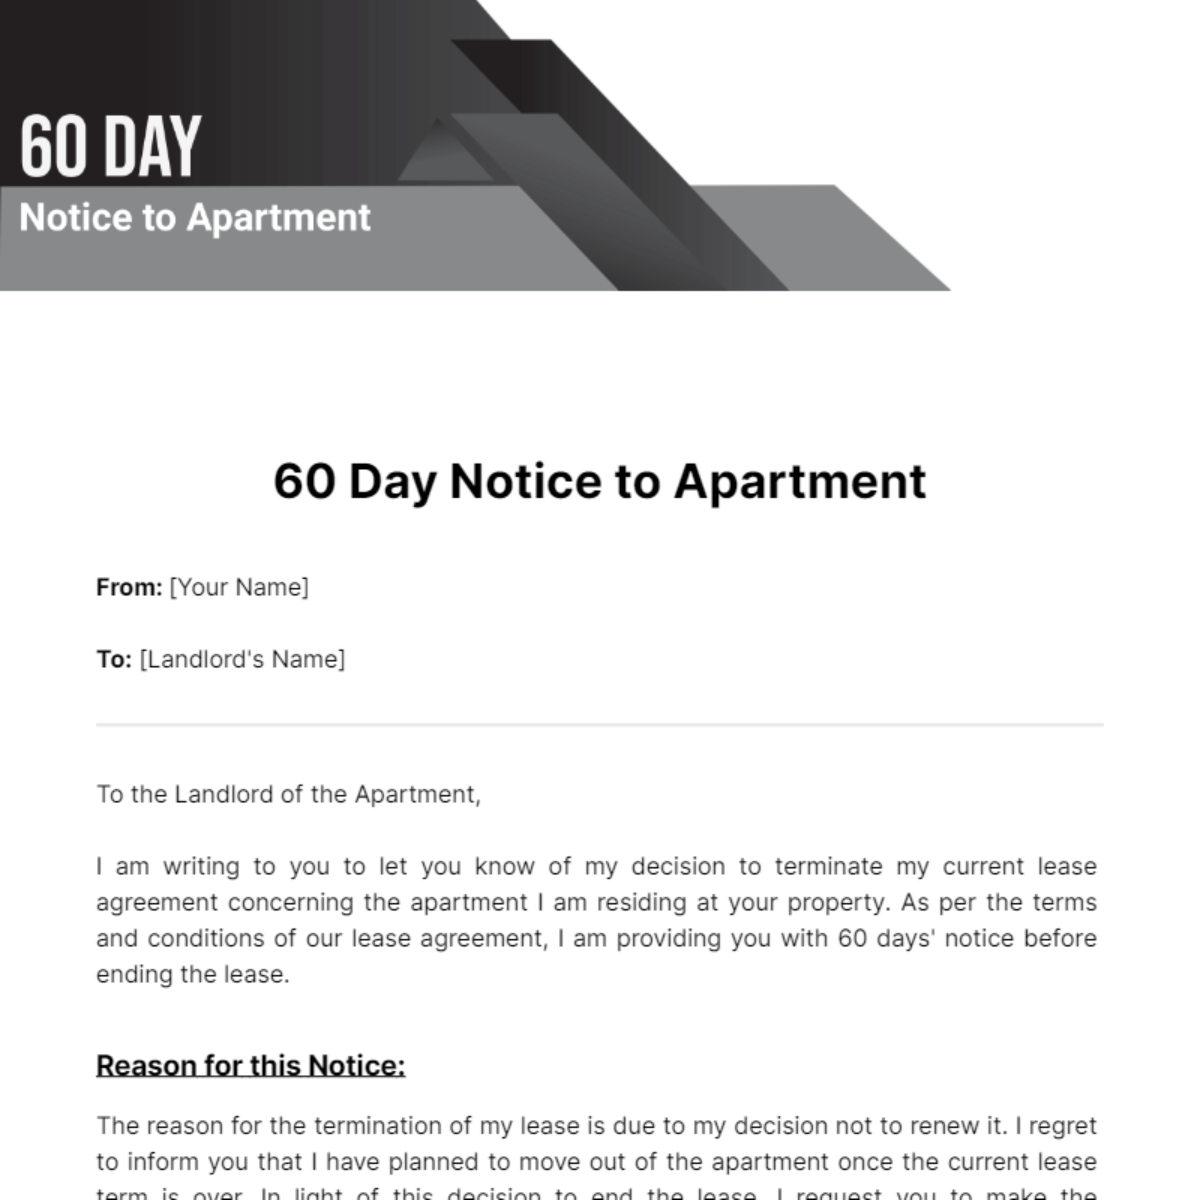 Free 60 Day Notice to Apartment Template